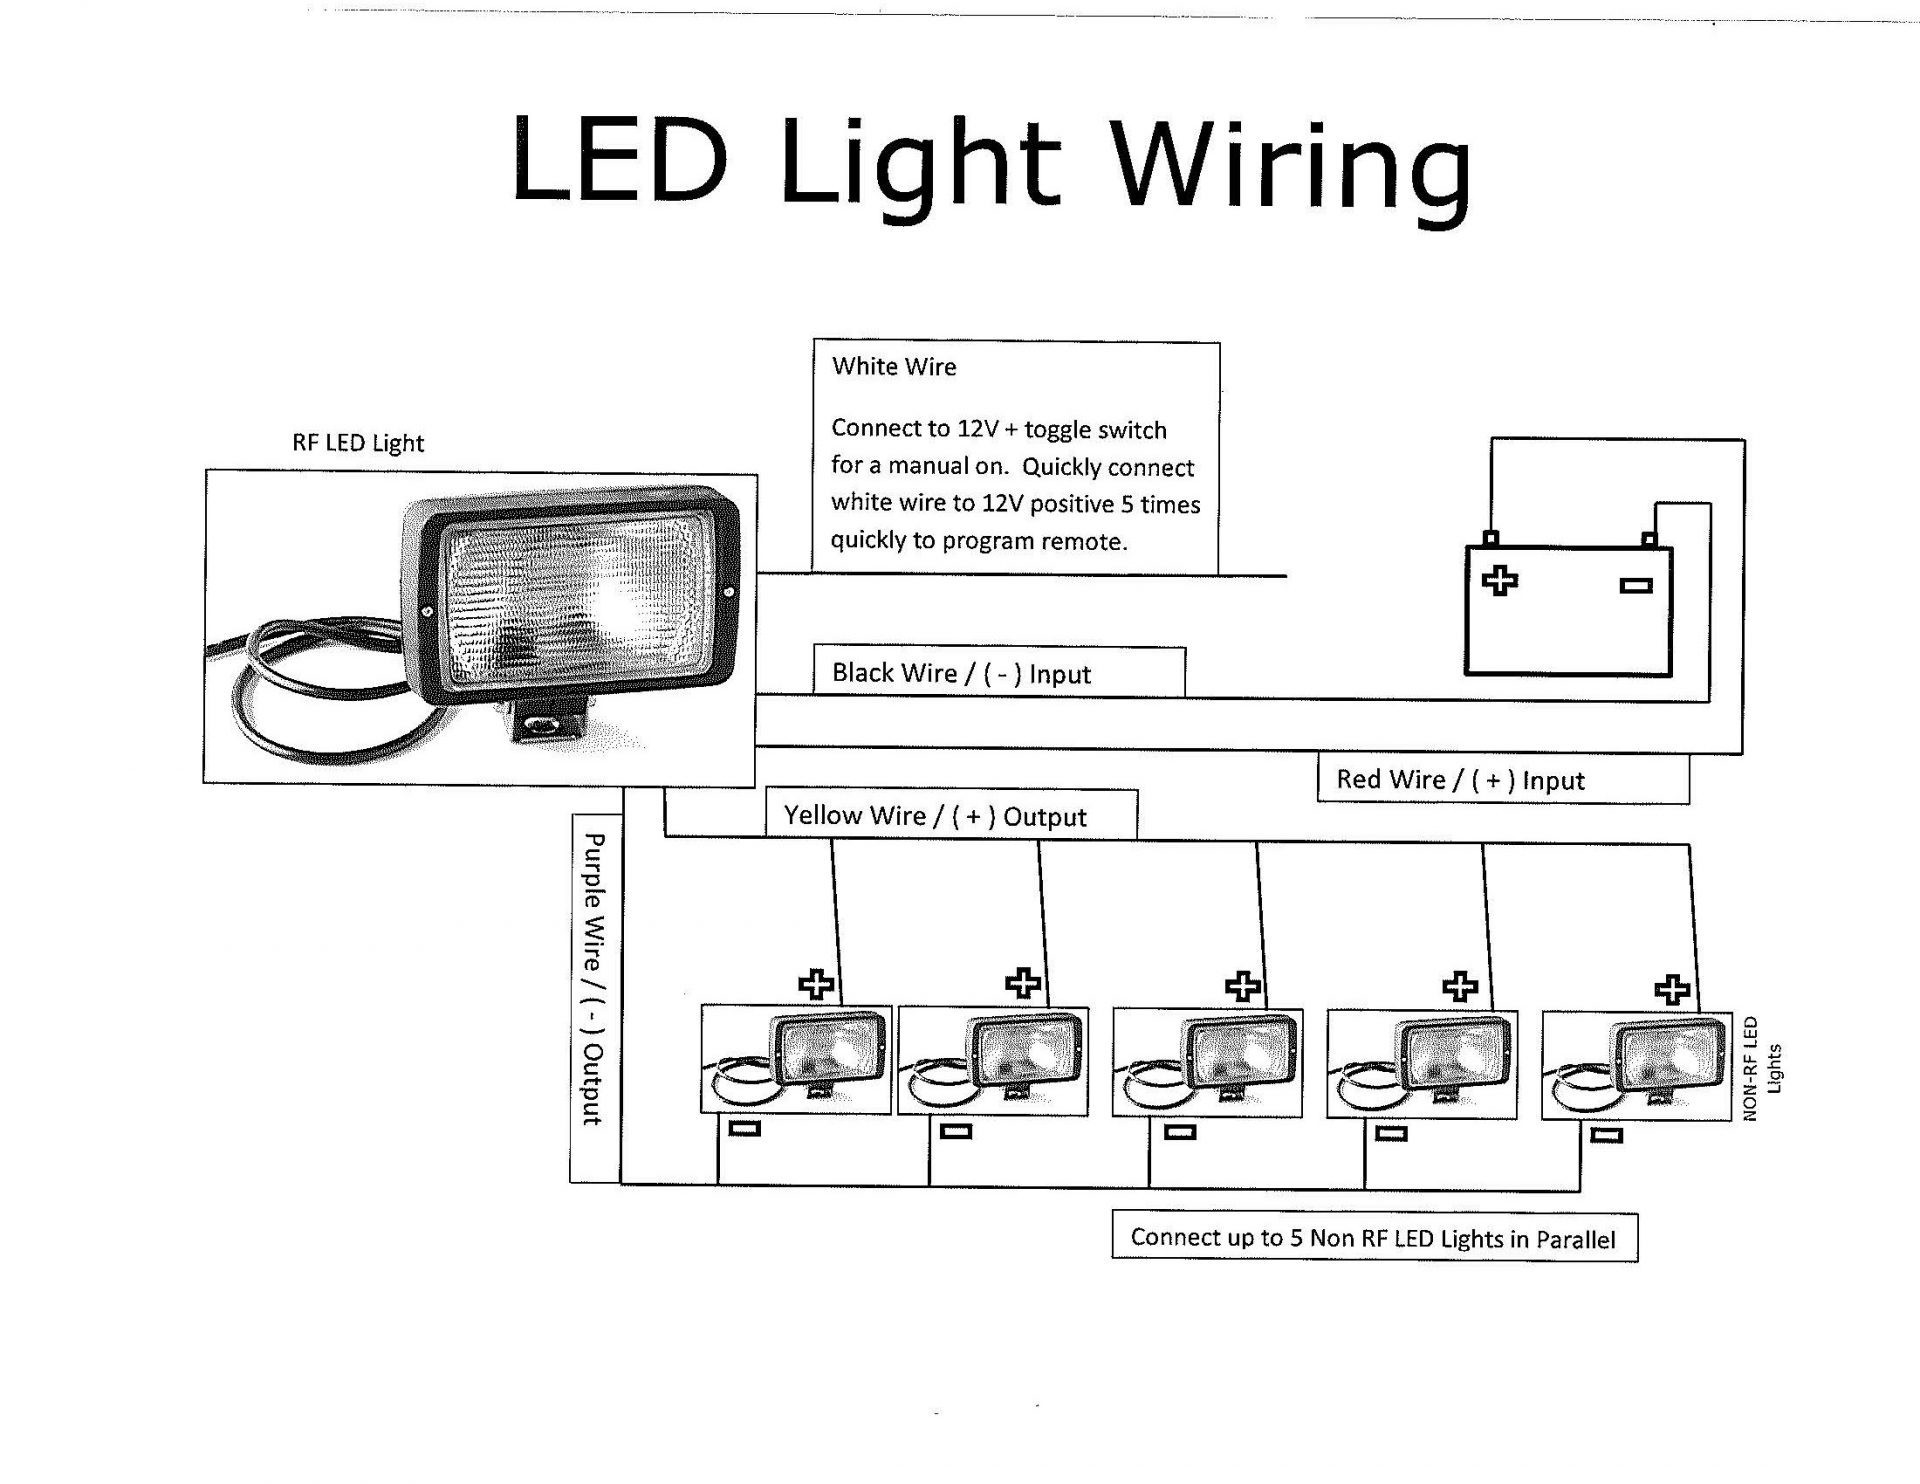 Trailer Light Wiring Diagram Inspirational 3brake Wire Trailer Light Diagram Led Wiring Speedy Jims Home Page